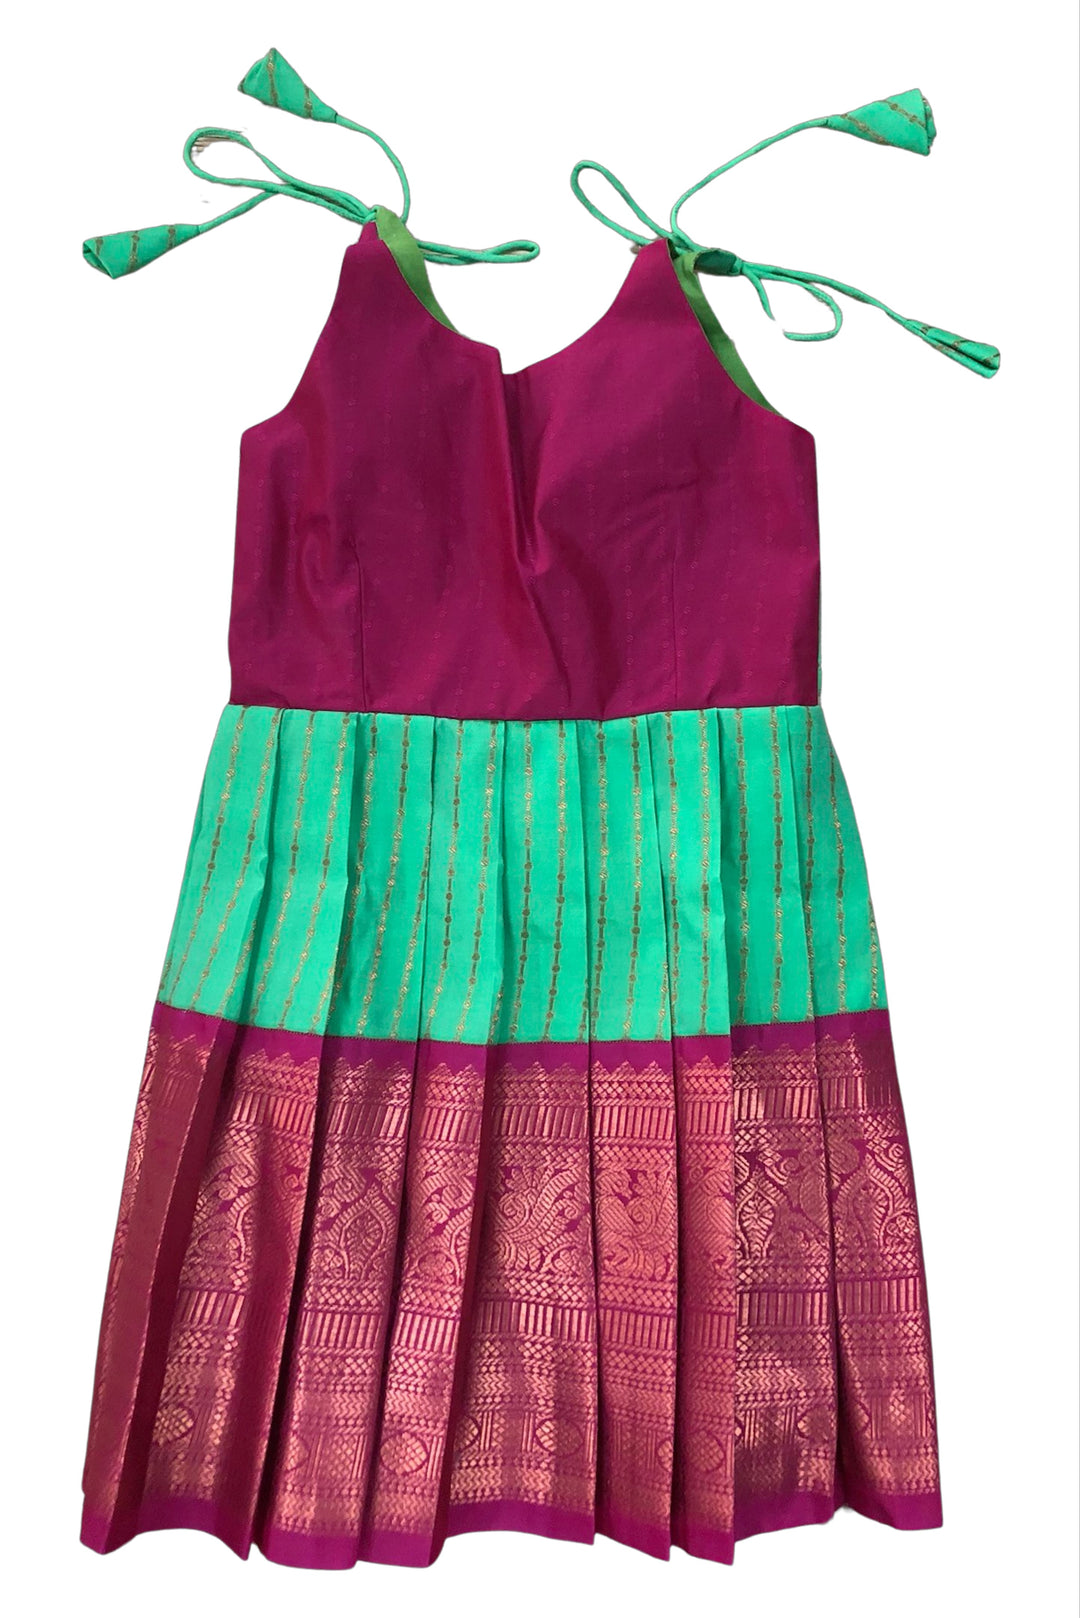 The Nesavu Tie-up Frock Magenta and Green Silk Tie-Up Frock - Traditional Party Dress Nesavu 18 (2Y) / Green / Style 2 T297B-18 Silk Party Dress in Magenta & Emerald | Ethnic Print Tie-Up Frock | The Nesavu